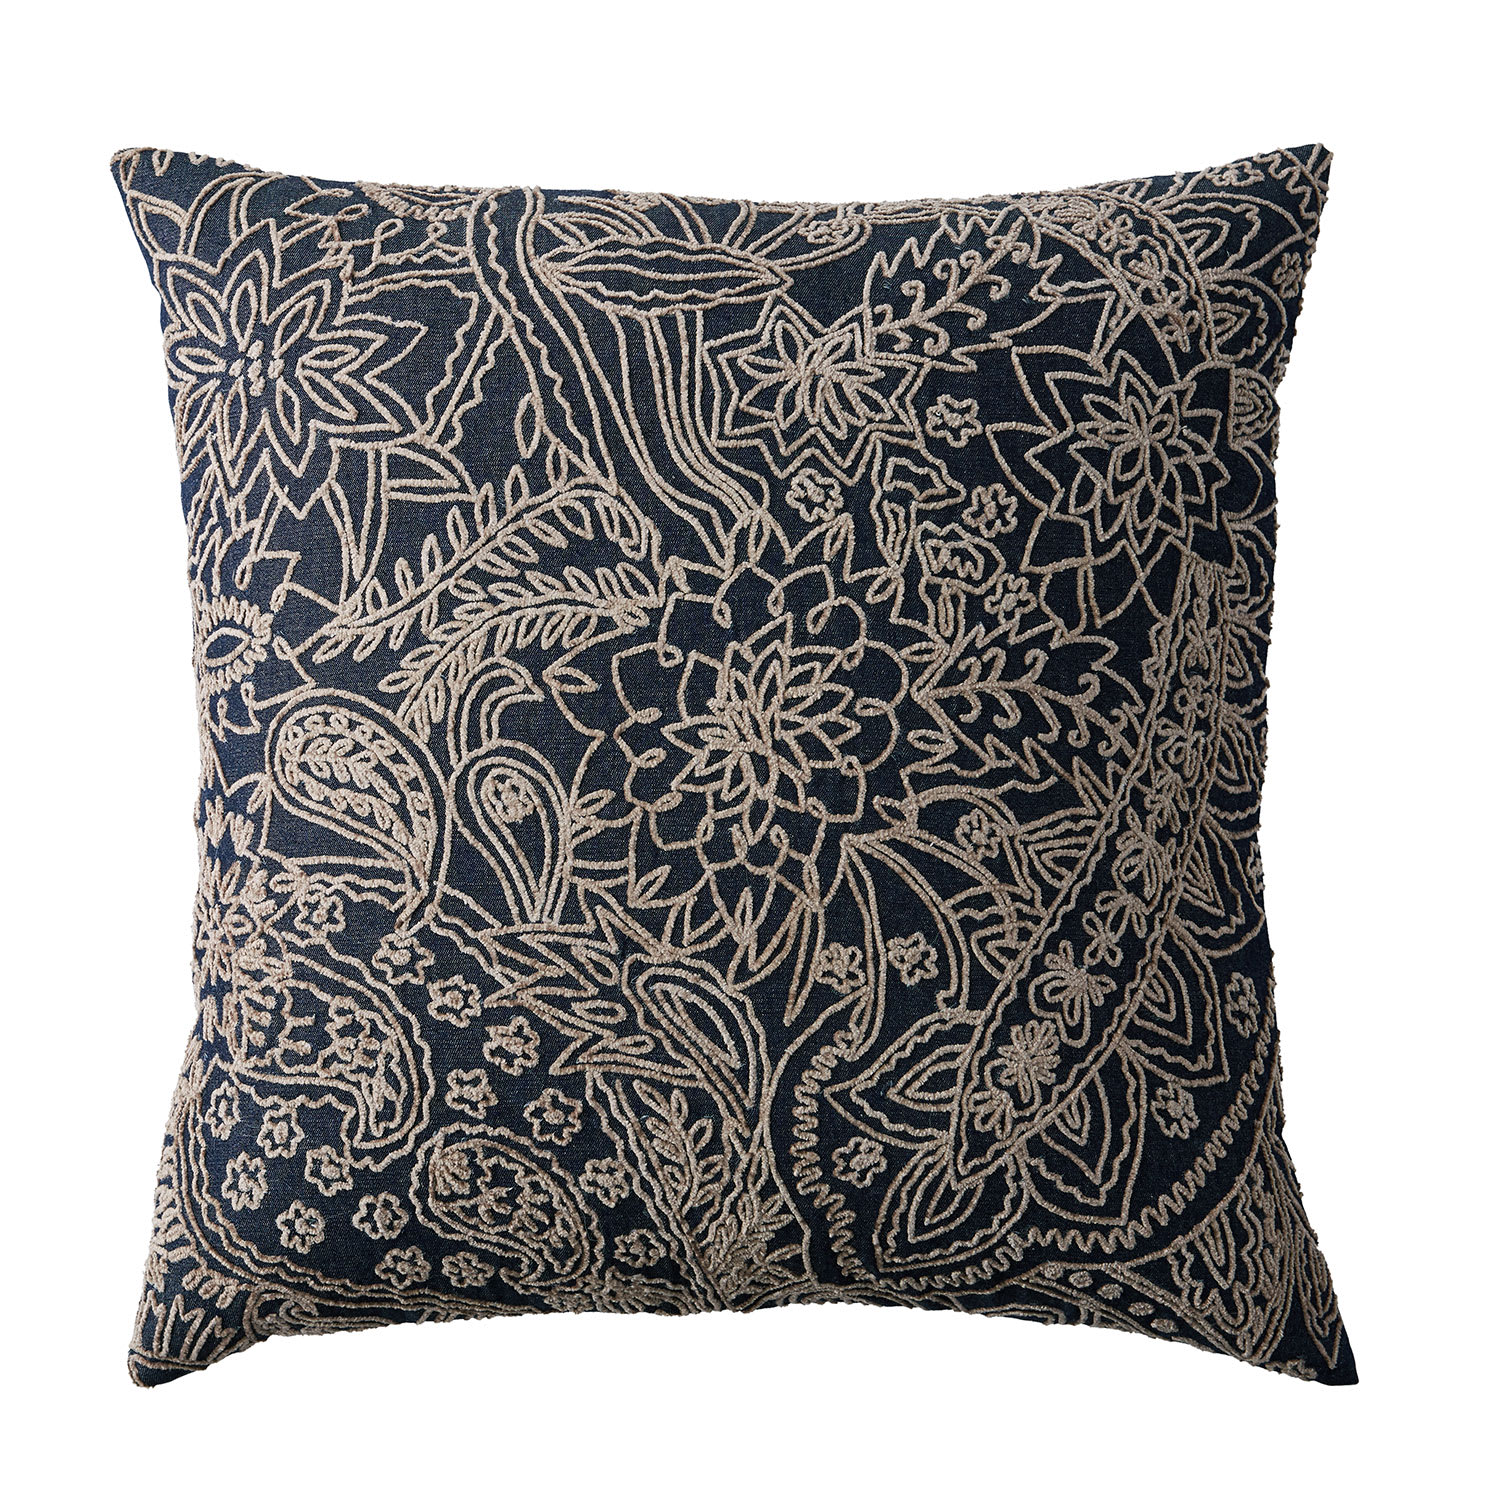 Blue Multicolored Paisley Embroidered Pillow Cover - Embroidered Paisley